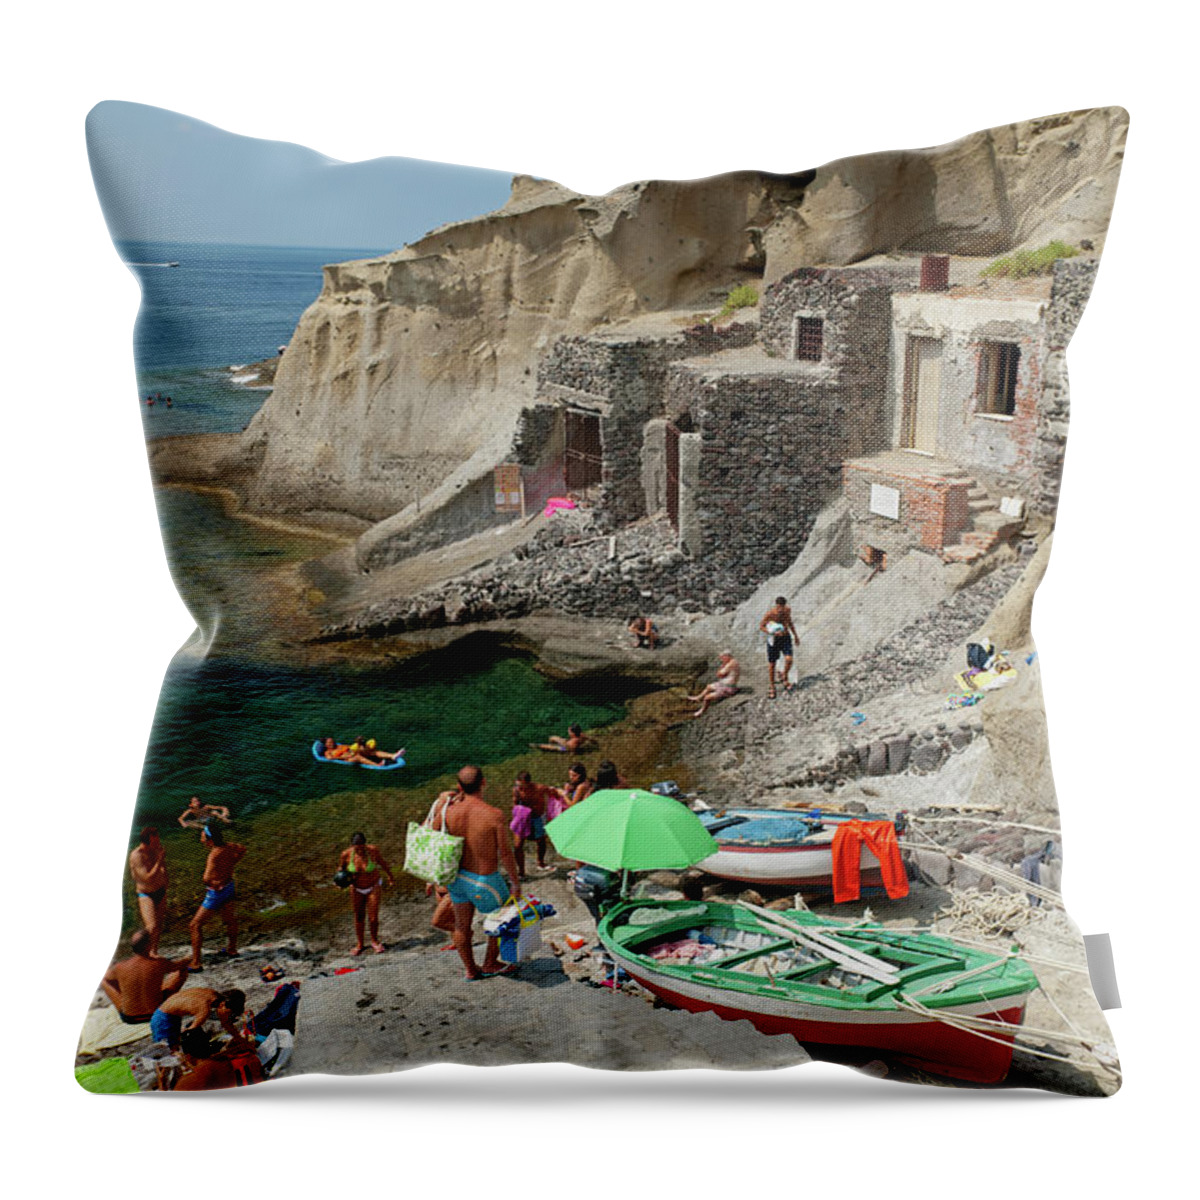 Steps Throw Pillow featuring the photograph Boatsheds, Rocky Cliffs, And People At by Dallas Stribley